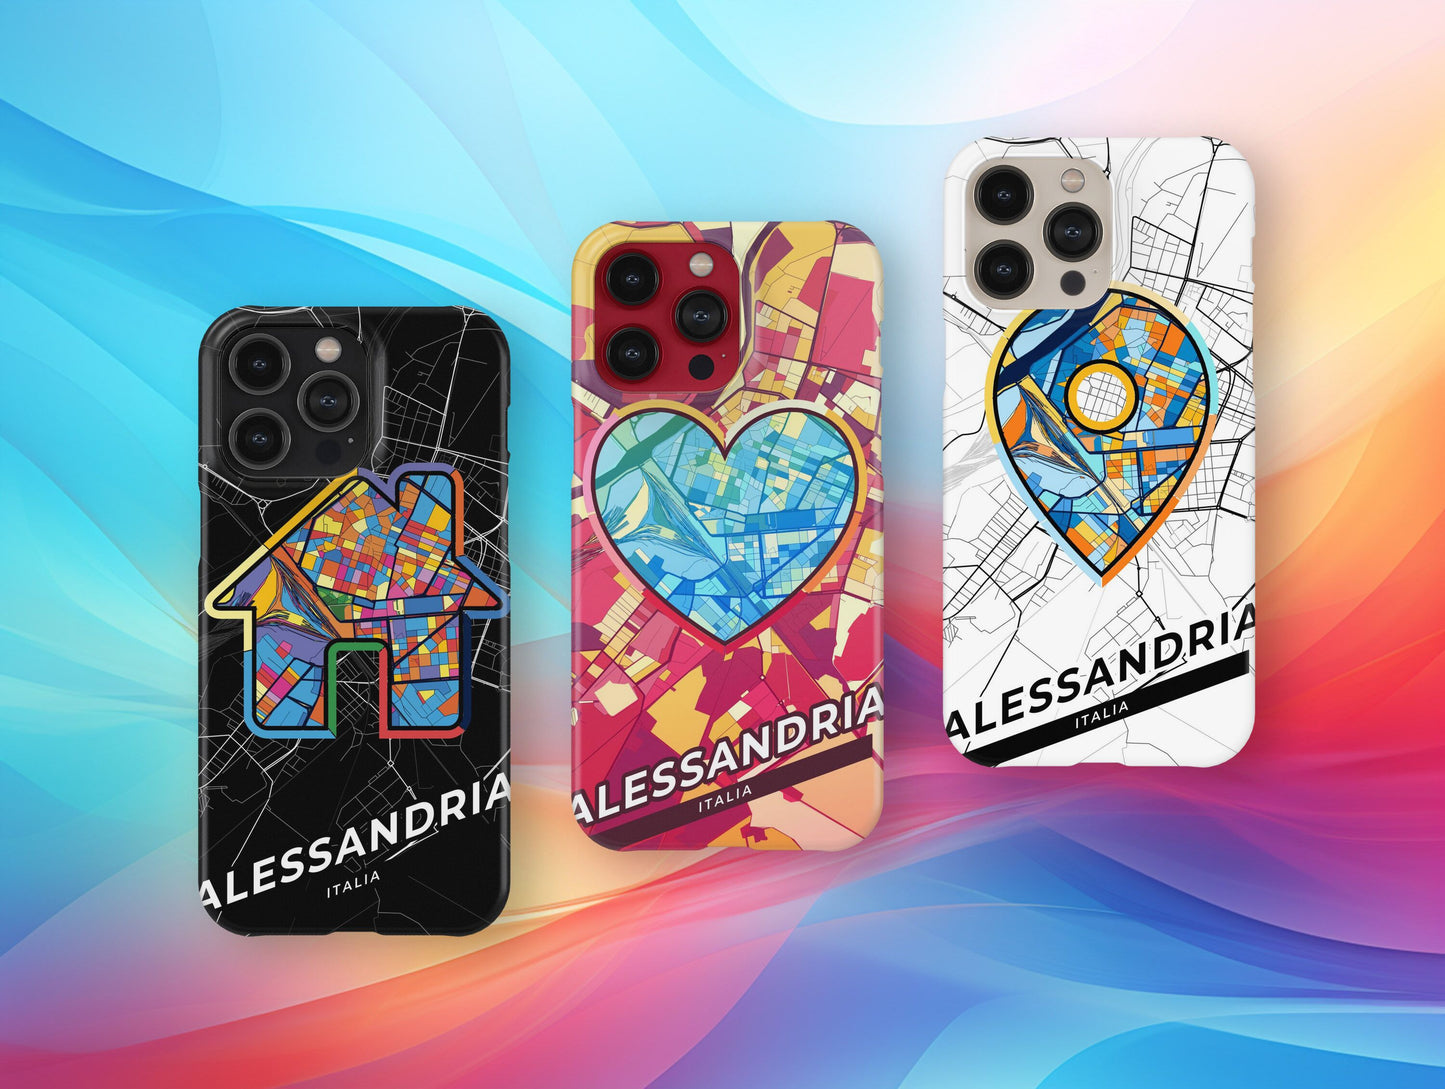 Alessandria Italy slim phone case with colorful icon. Birthday, wedding or housewarming gift. Couple match cases.